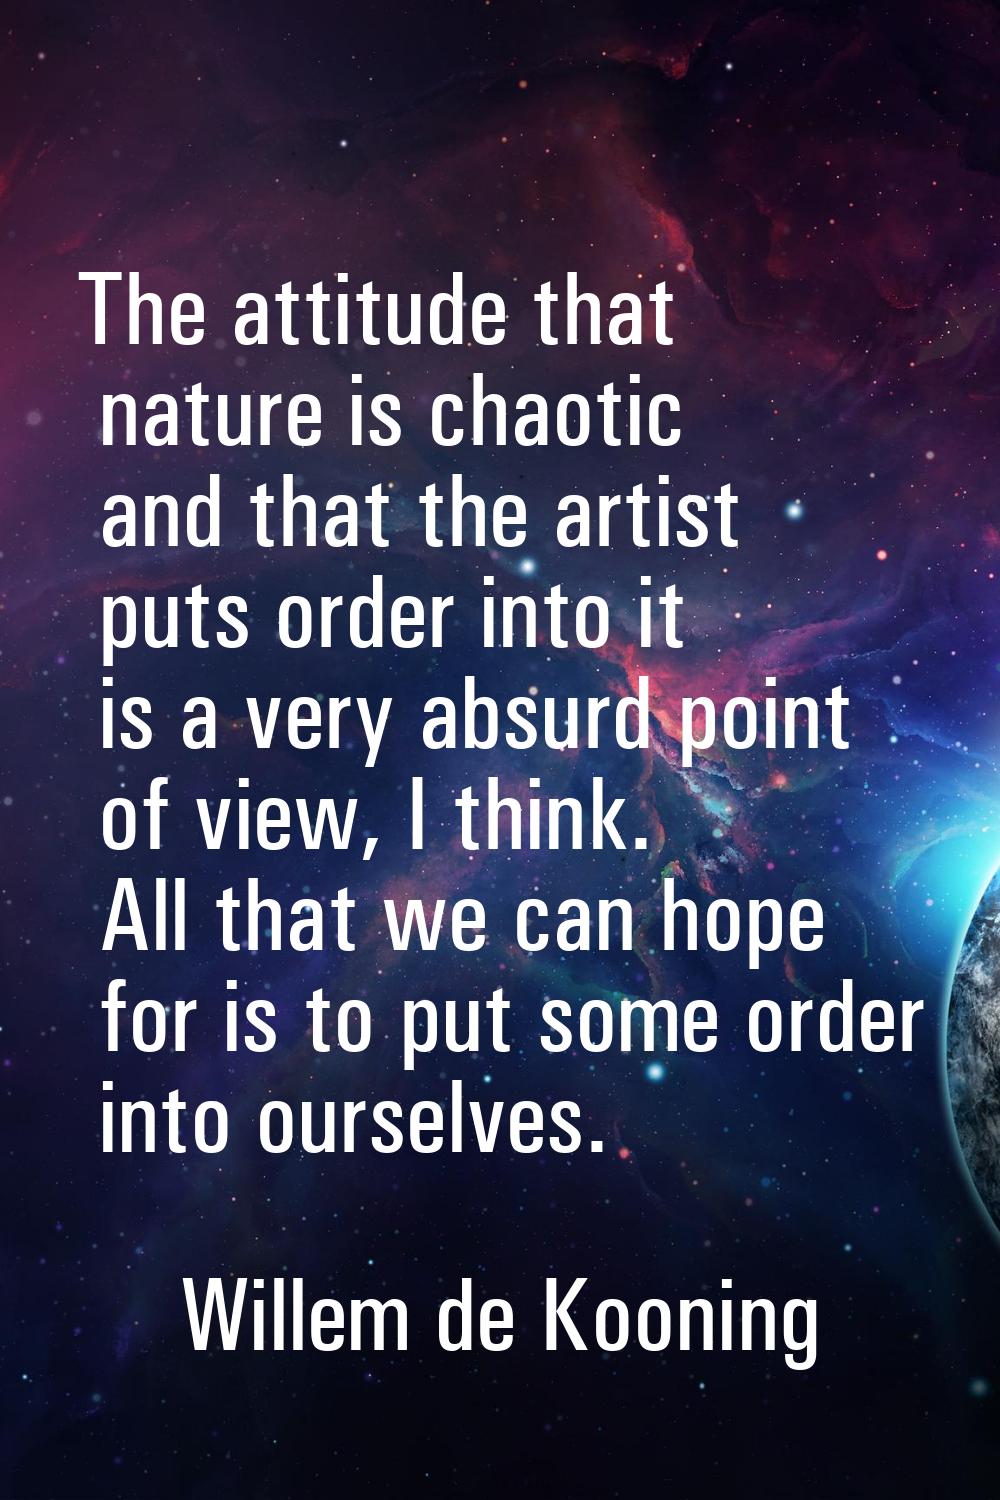 The attitude that nature is chaotic and that the artist puts order into it is a very absurd point o